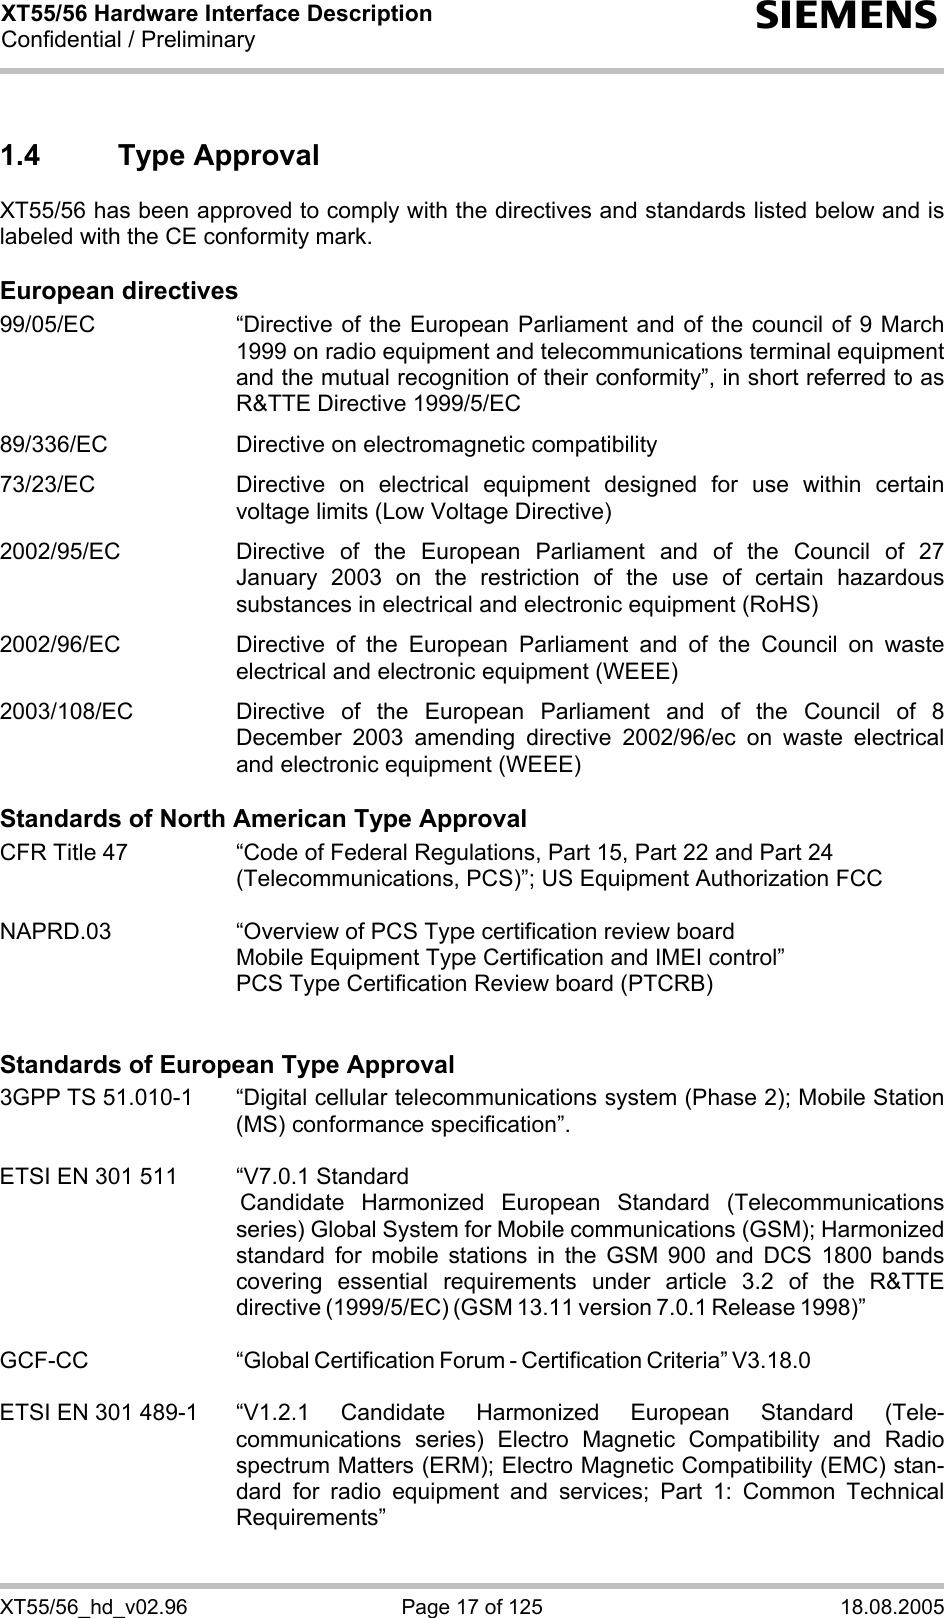 XT55/56 Hardware Interface Description Confidential / Preliminary s XT55/56_hd_v02.96  Page 17 of 125  18.08.2005 1.4 Type Approval XT55/56 has been approved to comply with the directives and standards listed below and is labeled with the CE conformity mark.  European directives 99/05/EC  “Directive of the European Parliament and of the council of 9 March 1999 on radio equipment and telecommunications terminal equipment and the mutual recognition of their conformity”, in short referred to as R&amp;TTE Directive 1999/5/EC  89/336/EC  Directive on electromagnetic compatibility  73/23/EC  Directive on electrical equipment designed for use within certain voltage limits (Low Voltage Directive)  2002/95/EC   Directive of the European Parliament and of the Council of 27 January 2003 on the restriction of the use of certain hazardous substances in electrical and electronic equipment (RoHS)  2002/96/EC   Directive of the European Parliament and of the Council on waste electrical and electronic equipment (WEEE)  2003/108/EC   Directive of the European Parliament and of the Council of 8 December 2003 amending directive 2002/96/ec on waste electrical and electronic equipment (WEEE)  Standards of North American Type Approval CFR Title 47  “Code of Federal Regulations, Part 15, Part 22 and Part 24 (Telecommunications, PCS)”; US Equipment Authorization FCC  NAPRD.03  “Overview of PCS Type certification review board      Mobile Equipment Type Certification and IMEI control”     PCS Type Certification Review board (PTCRB)   Standards of European Type Approval 3GPP TS 51.010-1  “Digital cellular telecommunications system (Phase 2); Mobile Station (MS) conformance specification”.   ETSI EN 301 511  “V7.0.1 Standard  Candidate Harmonized European Standard (Telecommunications series) Global System for Mobile communications (GSM); Harmonized standard for mobile stations in the GSM 900 and DCS 1800 bands covering essential requirements under article 3.2 of the R&amp;TTE directive (1999/5/EC) (GSM 13.11 version 7.0.1 Release 1998)”   GCF-CC “Global Certification Forum - Certification Criteria” V3.18.0   ETSI EN 301 489-1  “V1.2.1 Candidate Harmonized European Standard (Tele-communications series) Electro Magnetic Compatibility and Radio spectrum Matters (ERM); Electro Magnetic Compatibility (EMC) stan-dard for radio equipment and services; Part 1: Common Technical Requirements”  